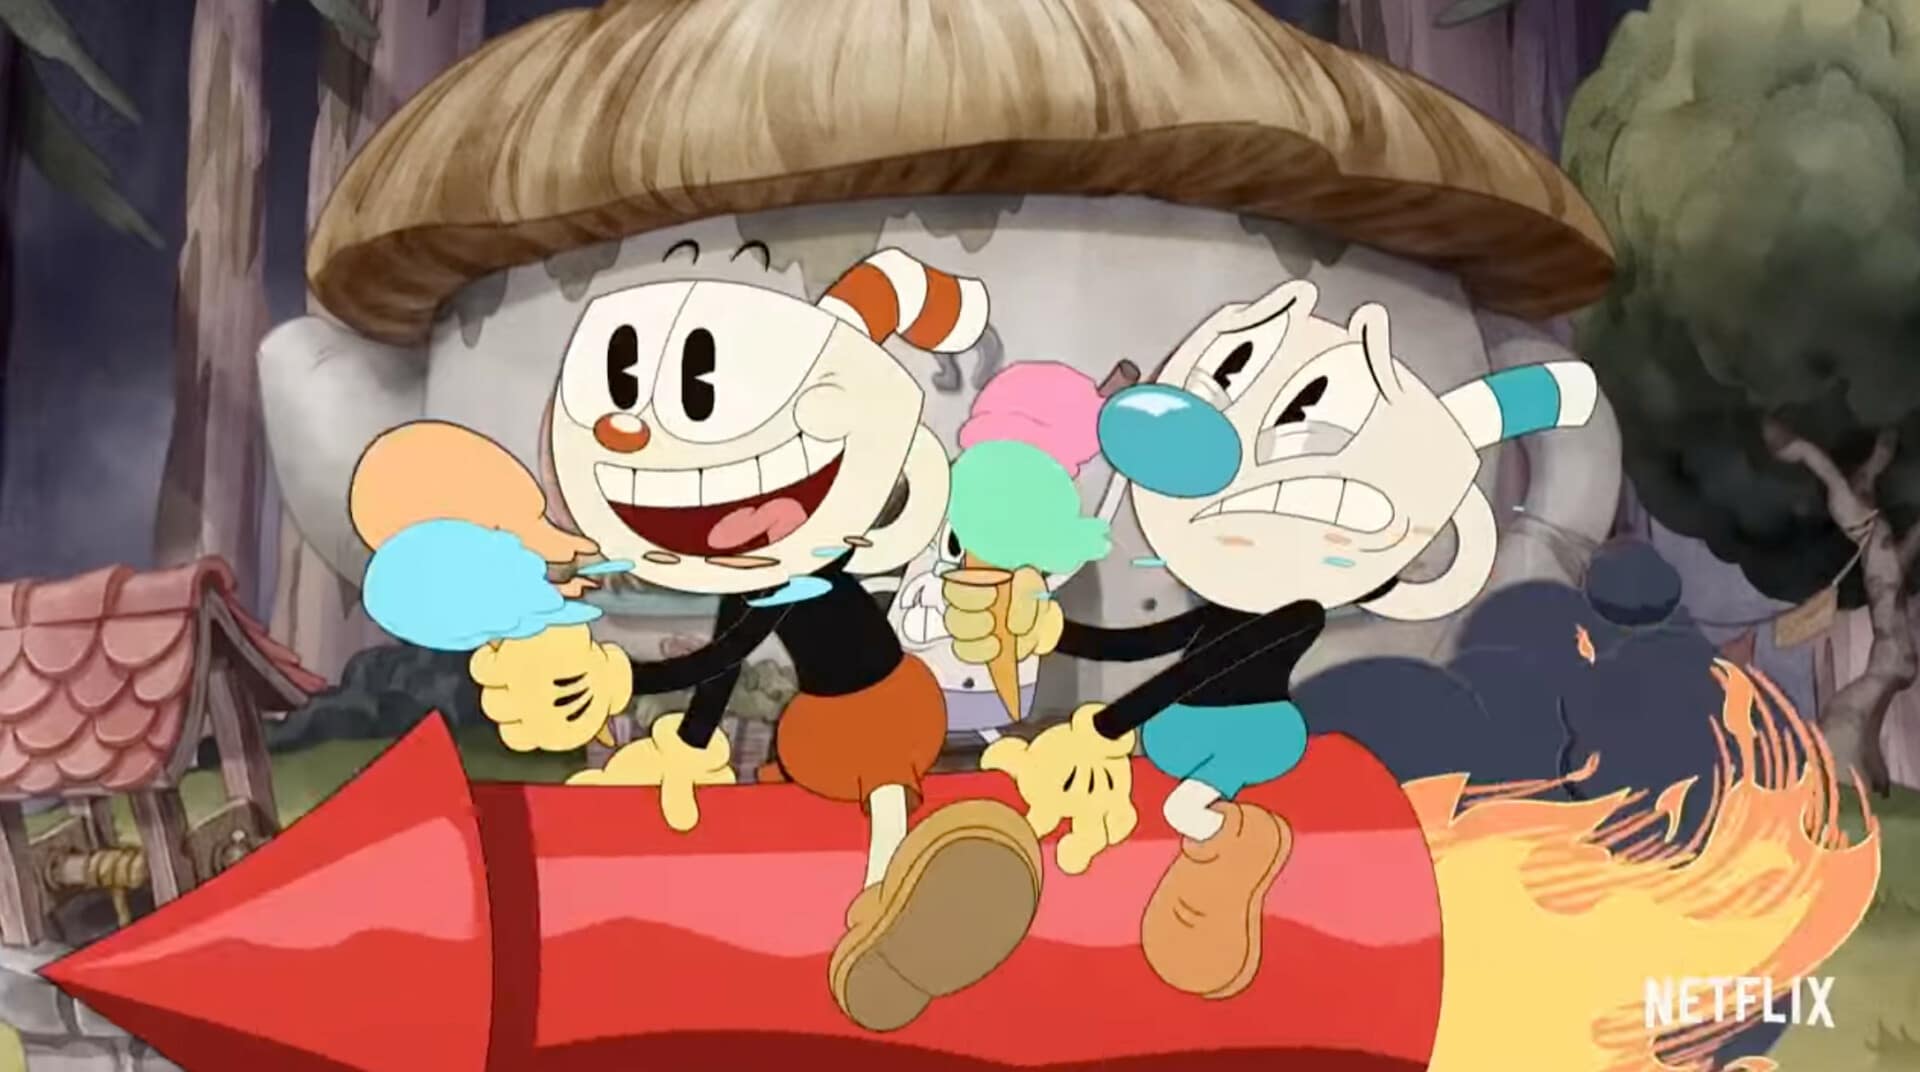 Netflix's 'The Cuphead Show!' review: A perfectly cute waste of a